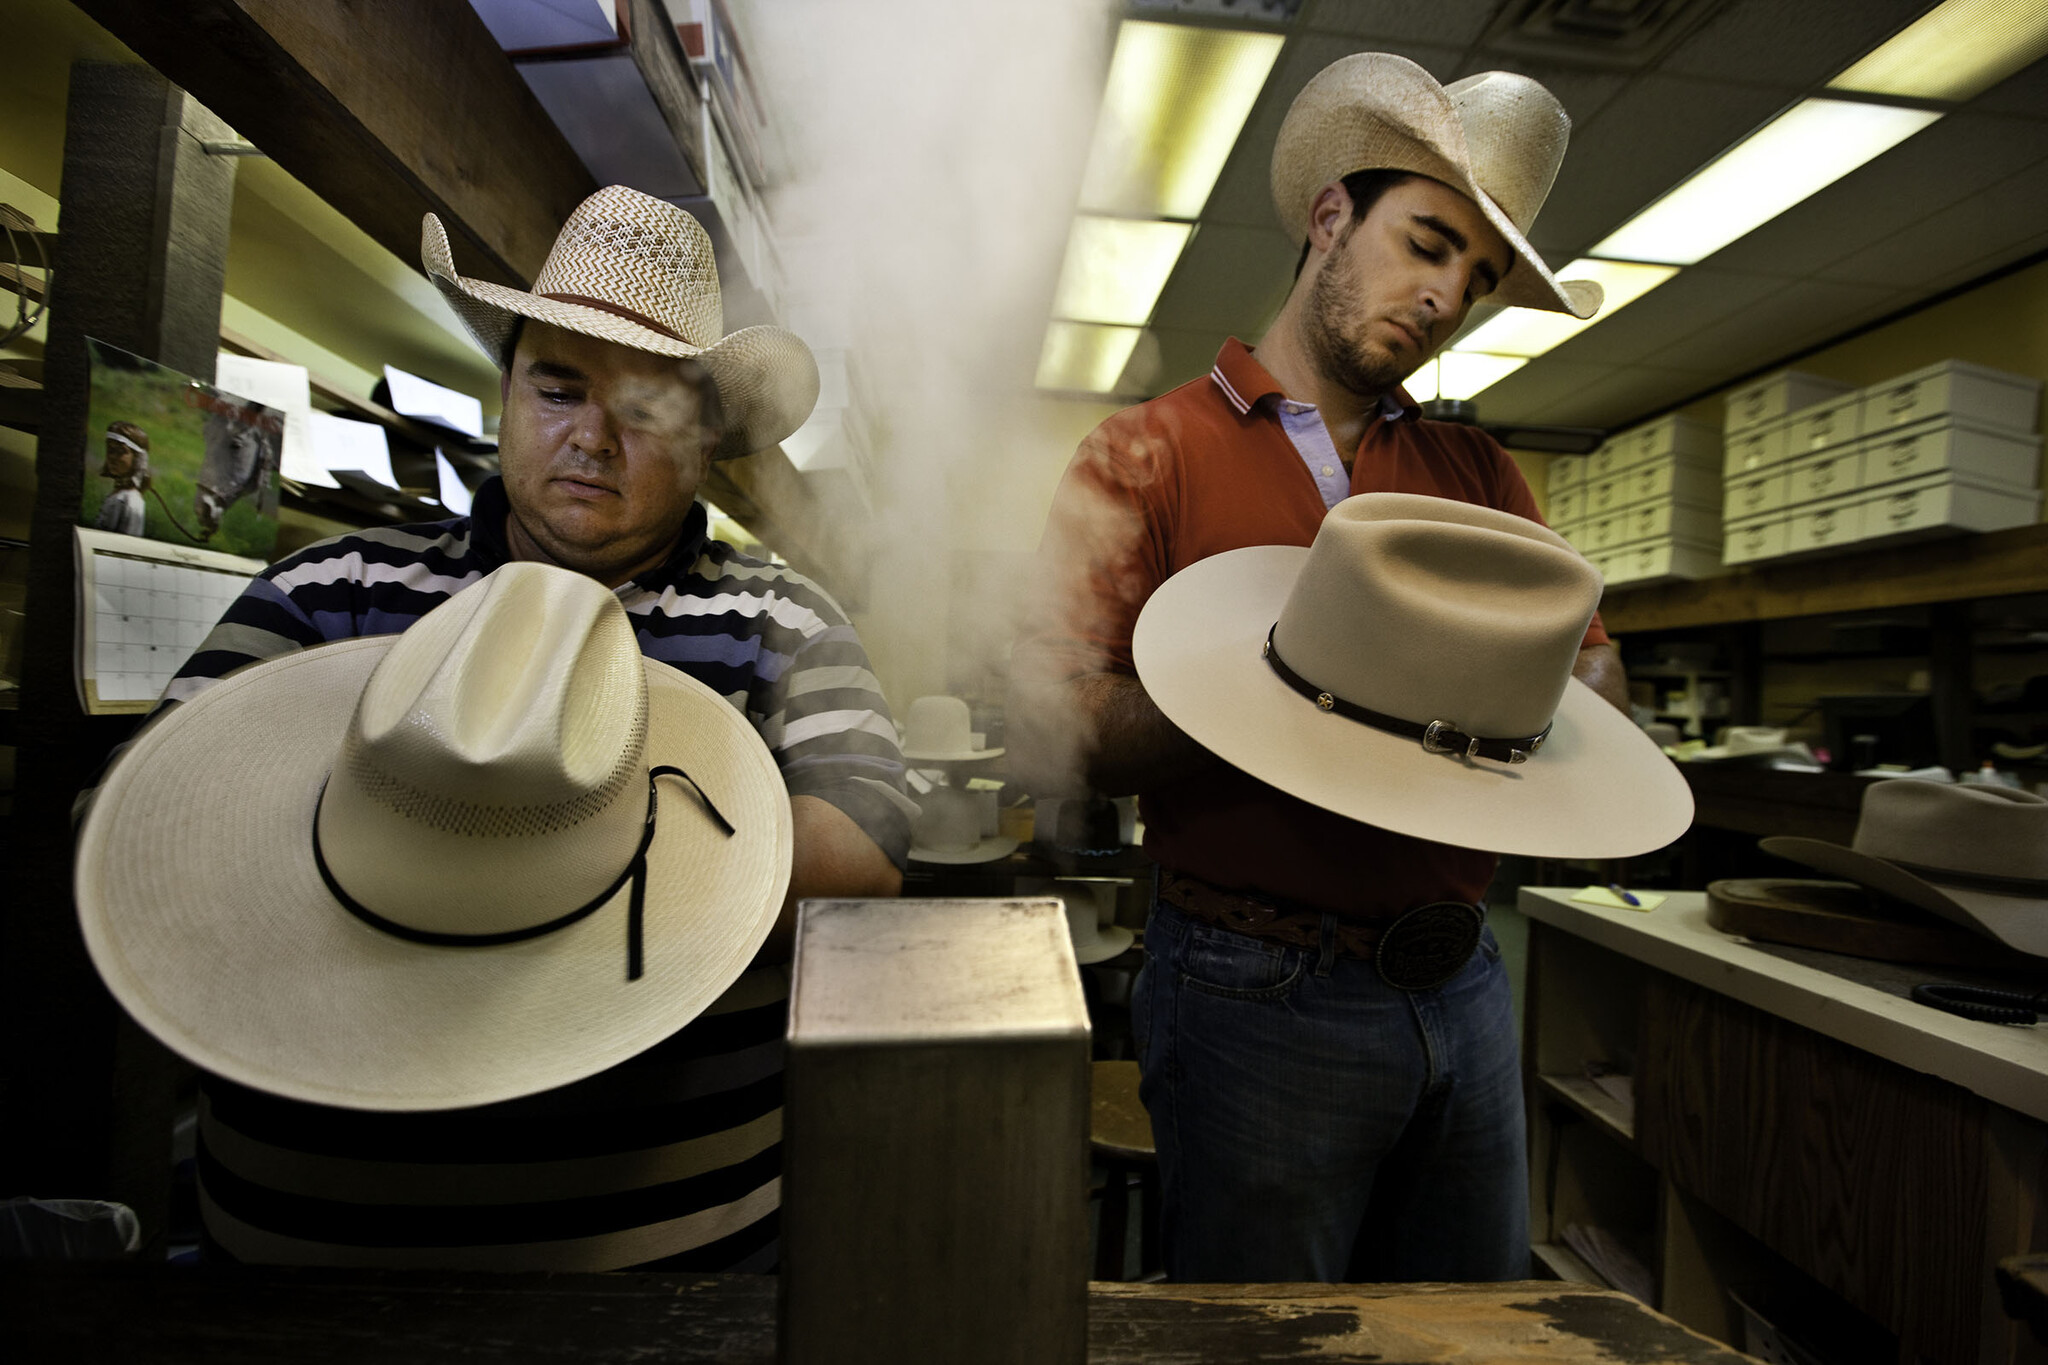 Hatters putting finishing touches to cowboy hats